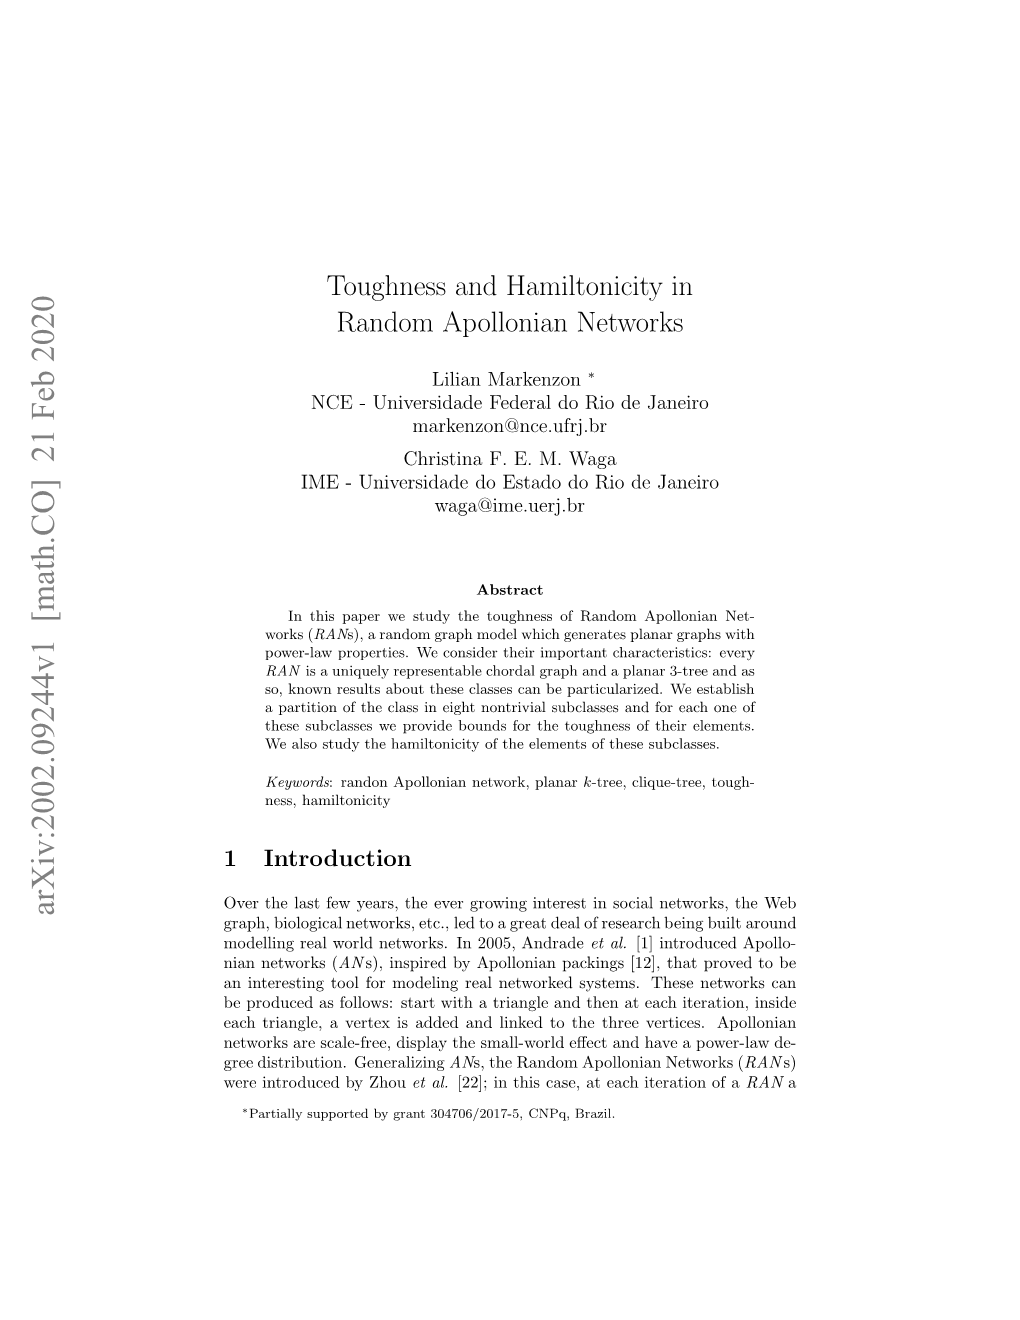 Toughness and Hamiltonicity in Random Apollonian Networks